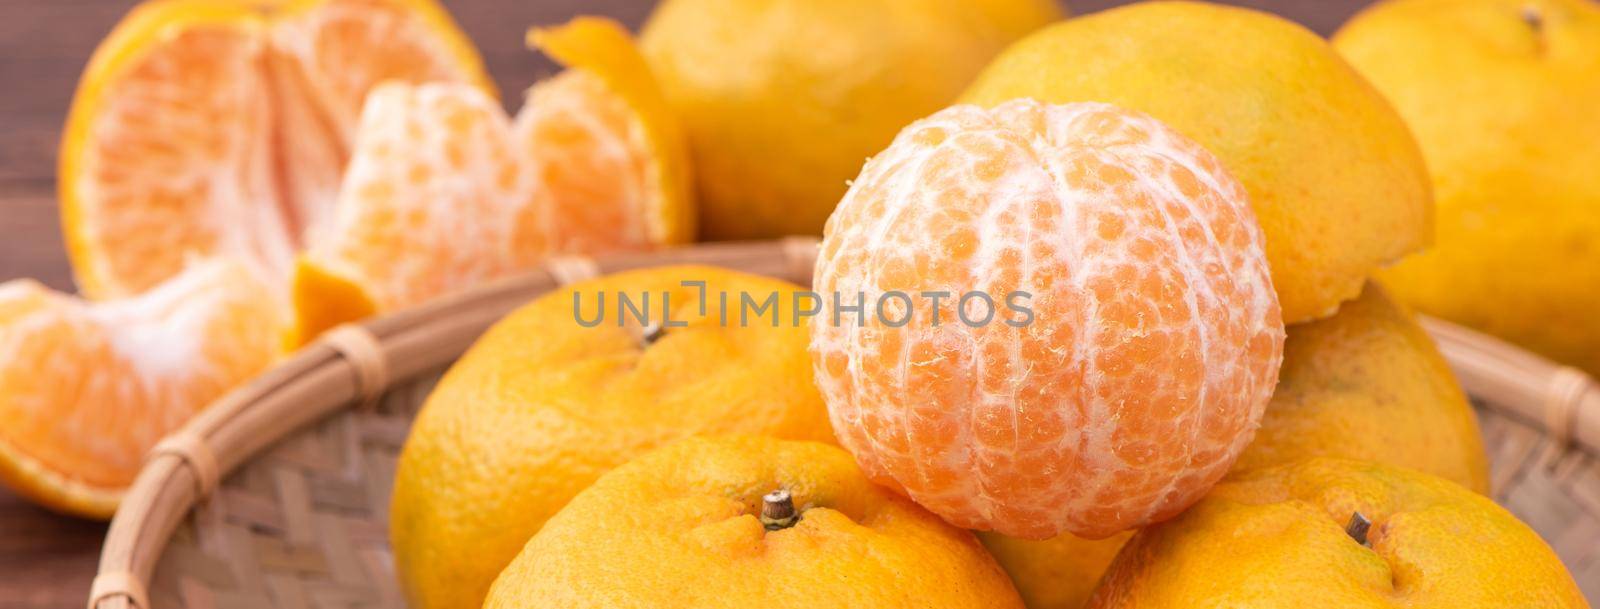 Fresh, beautiful orange color tangerine on bamboo sieve over dark wooden table. Seasonal, traditional fruit of Chinese lunar new year, close up.